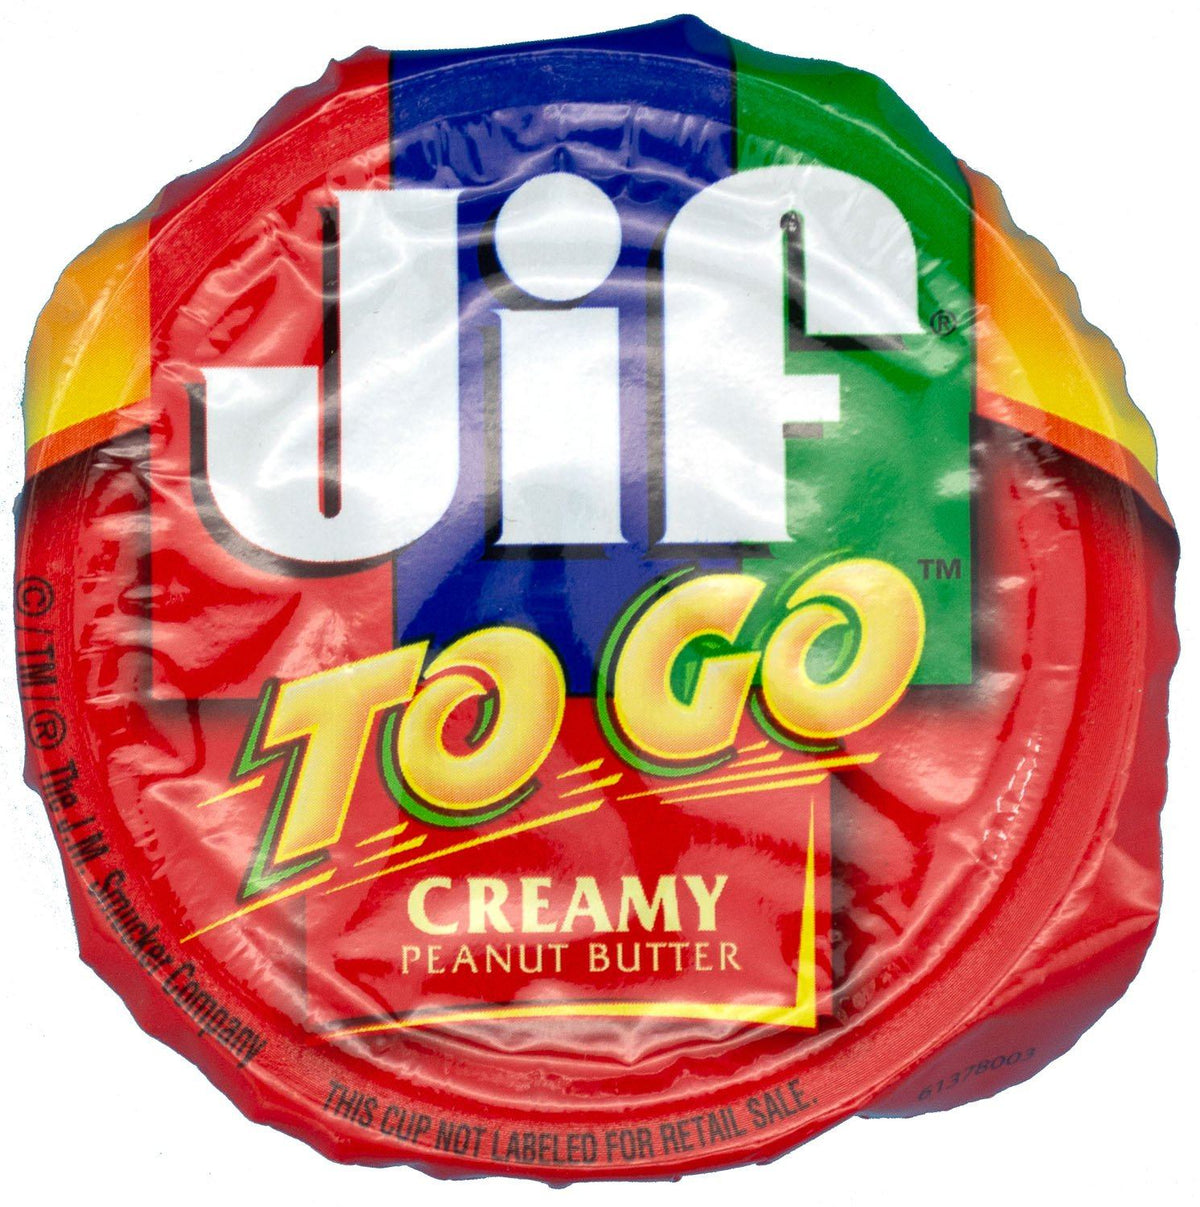 Jif To Go Creamy Peanut Butter, 1.5 oz Portion Control Cups, 36